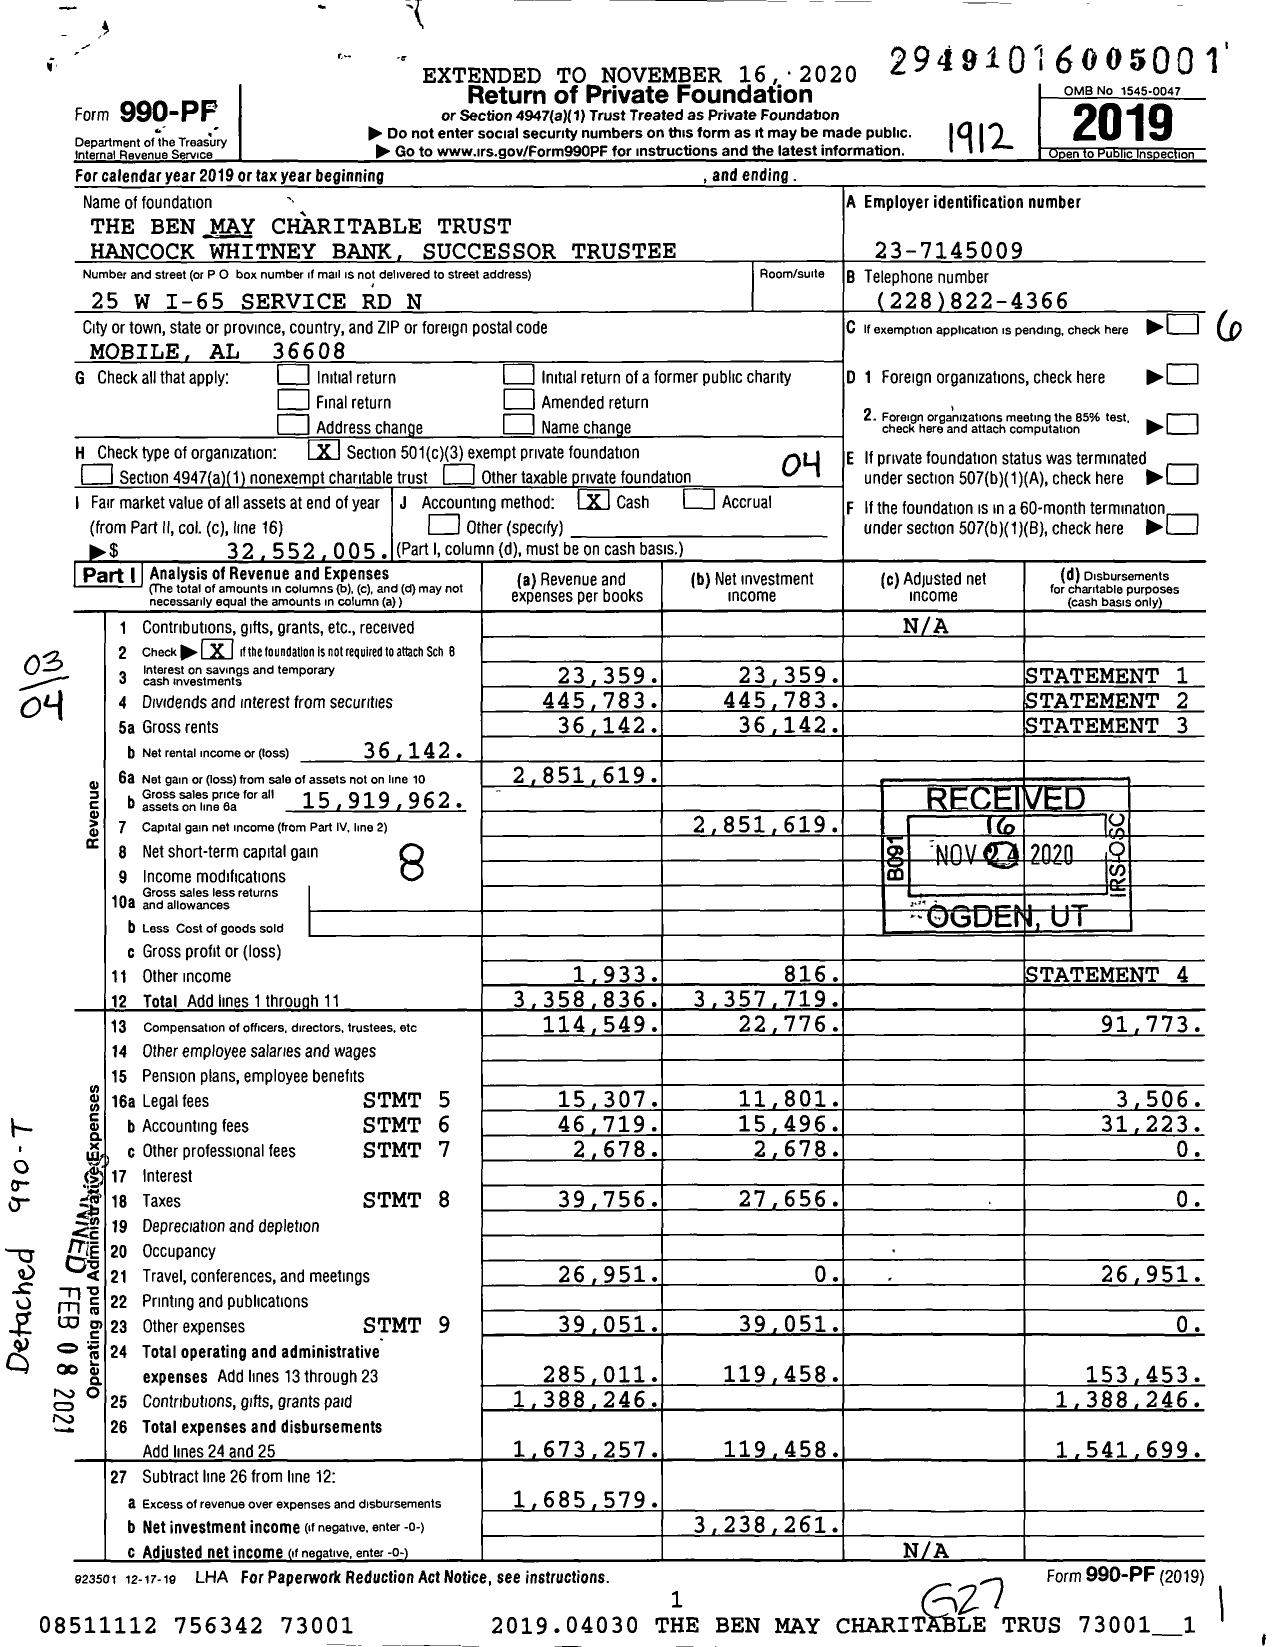 Image of first page of 2019 Form 990PF for The Ben May Charitable Trust Hancock Whitney Bank Successor Trustee